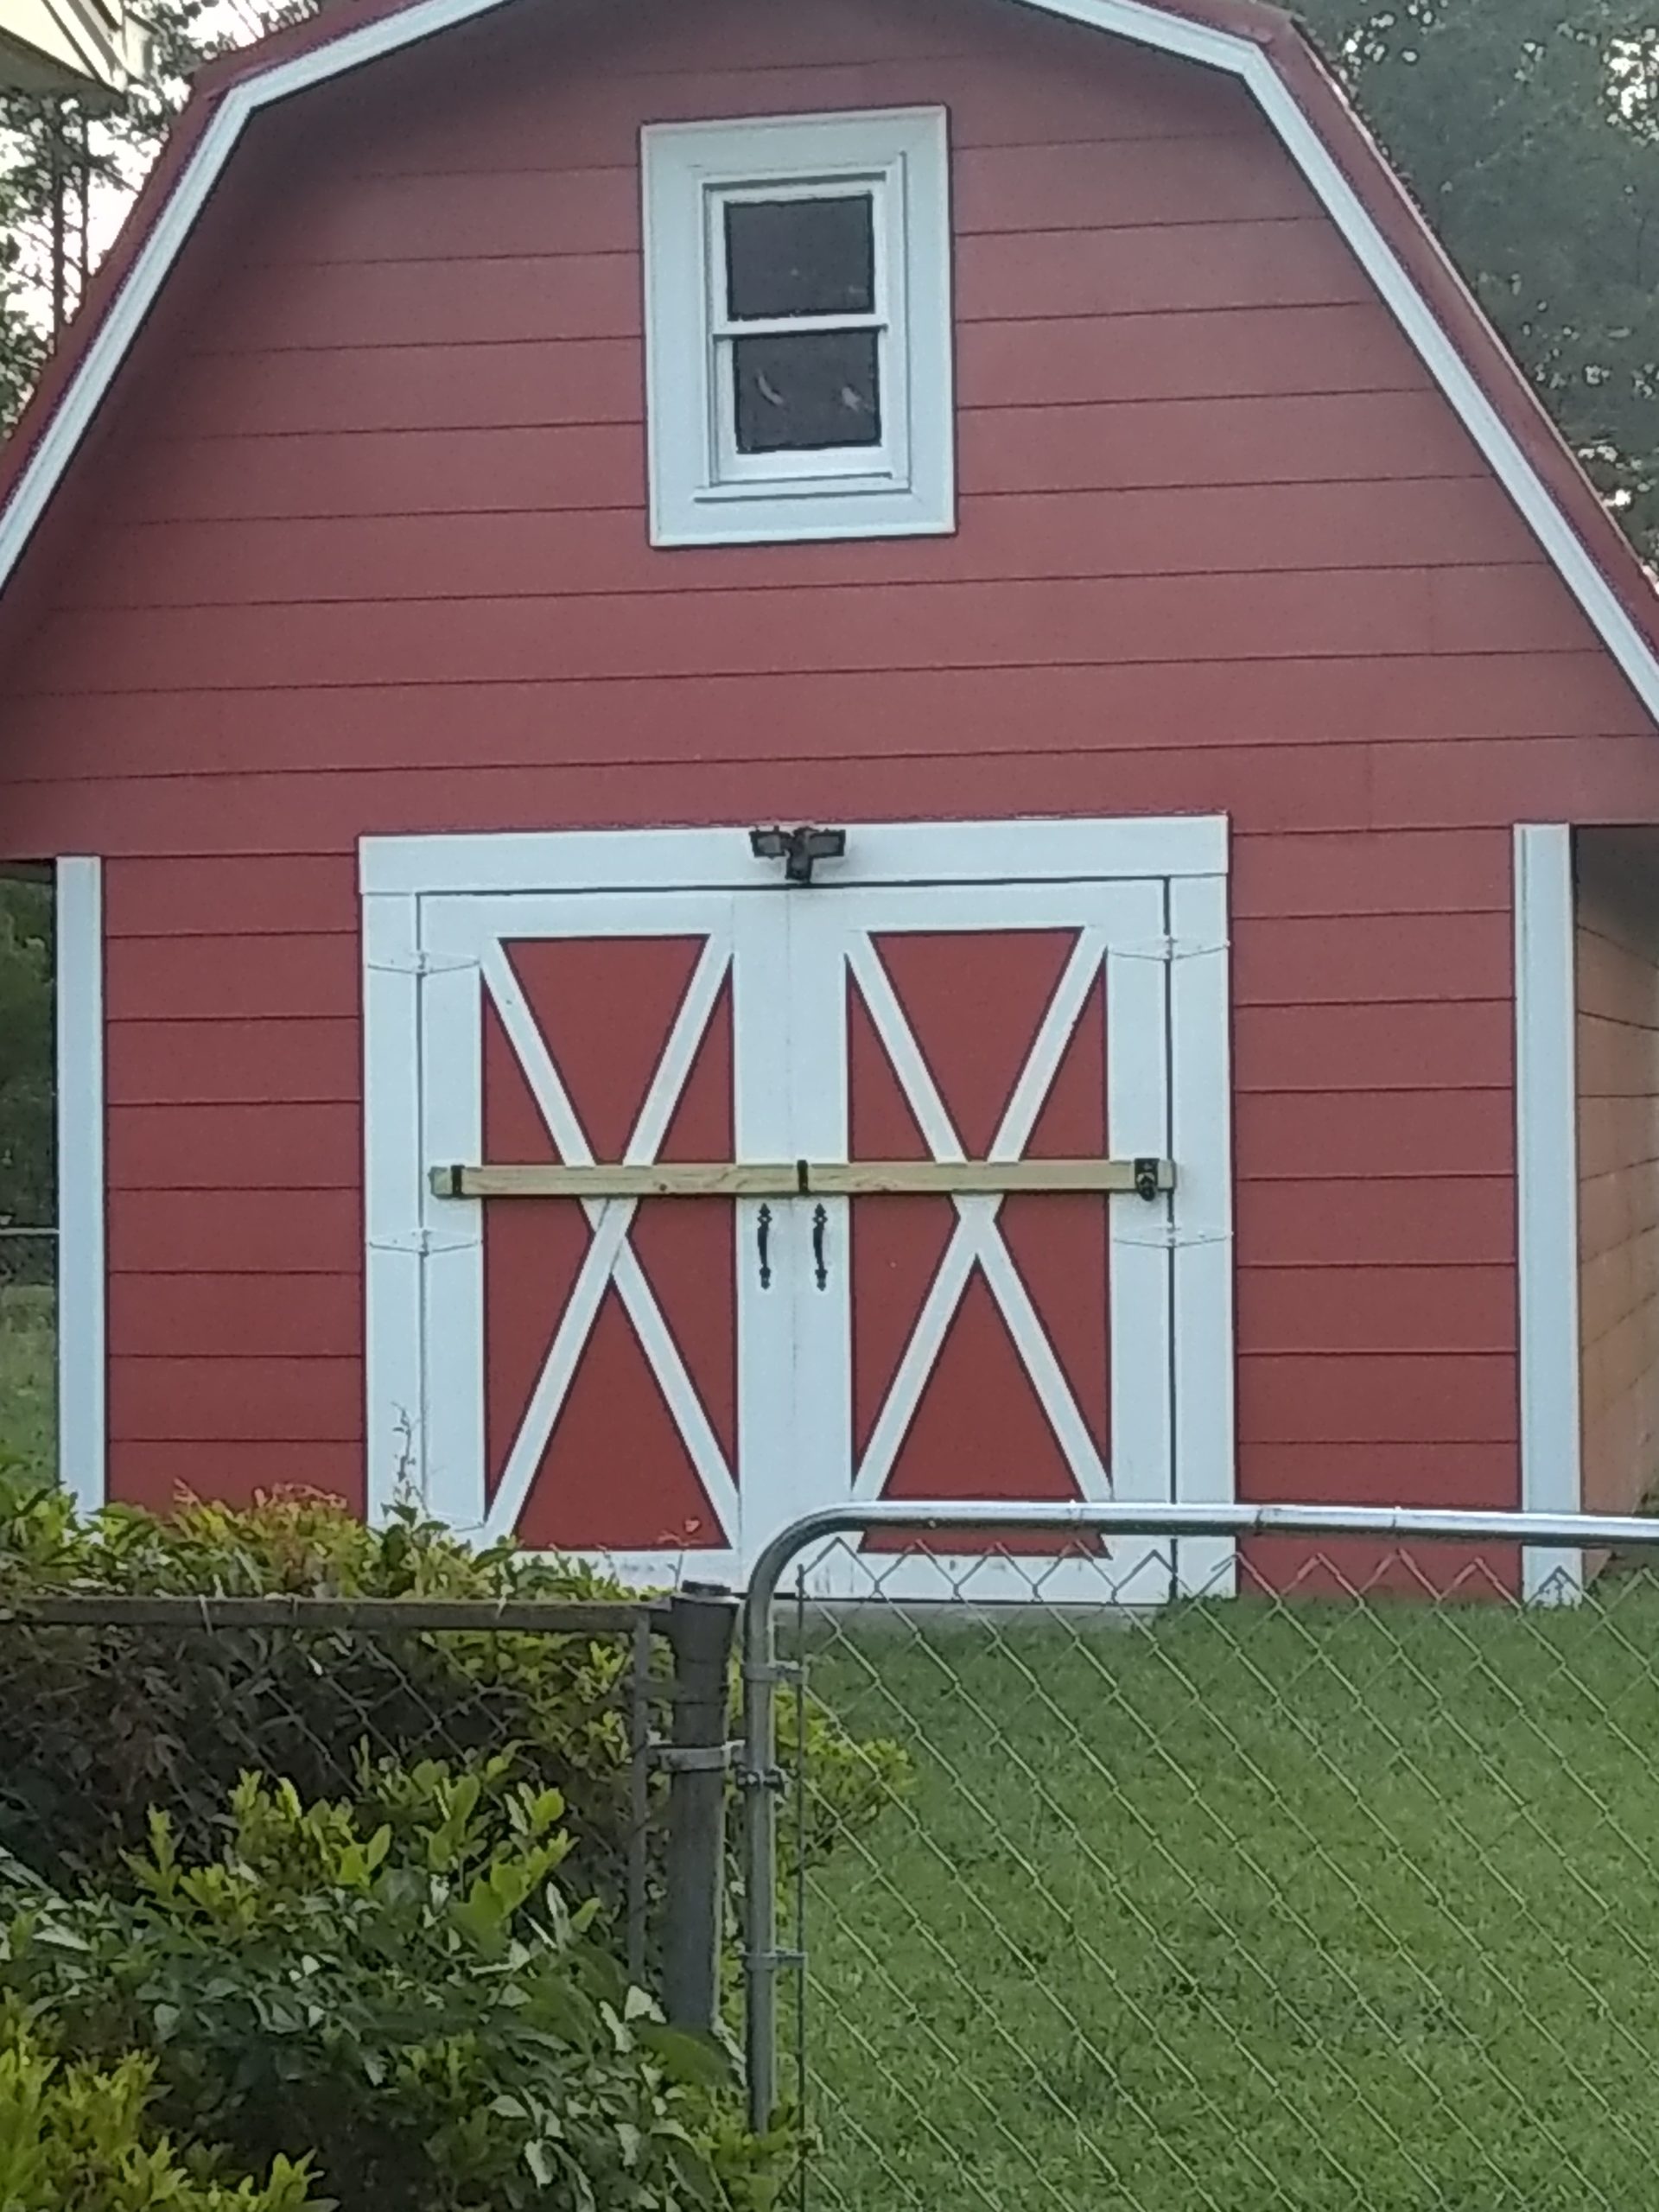 Red gable roofed barn with secure 2x4 bar holders with lock